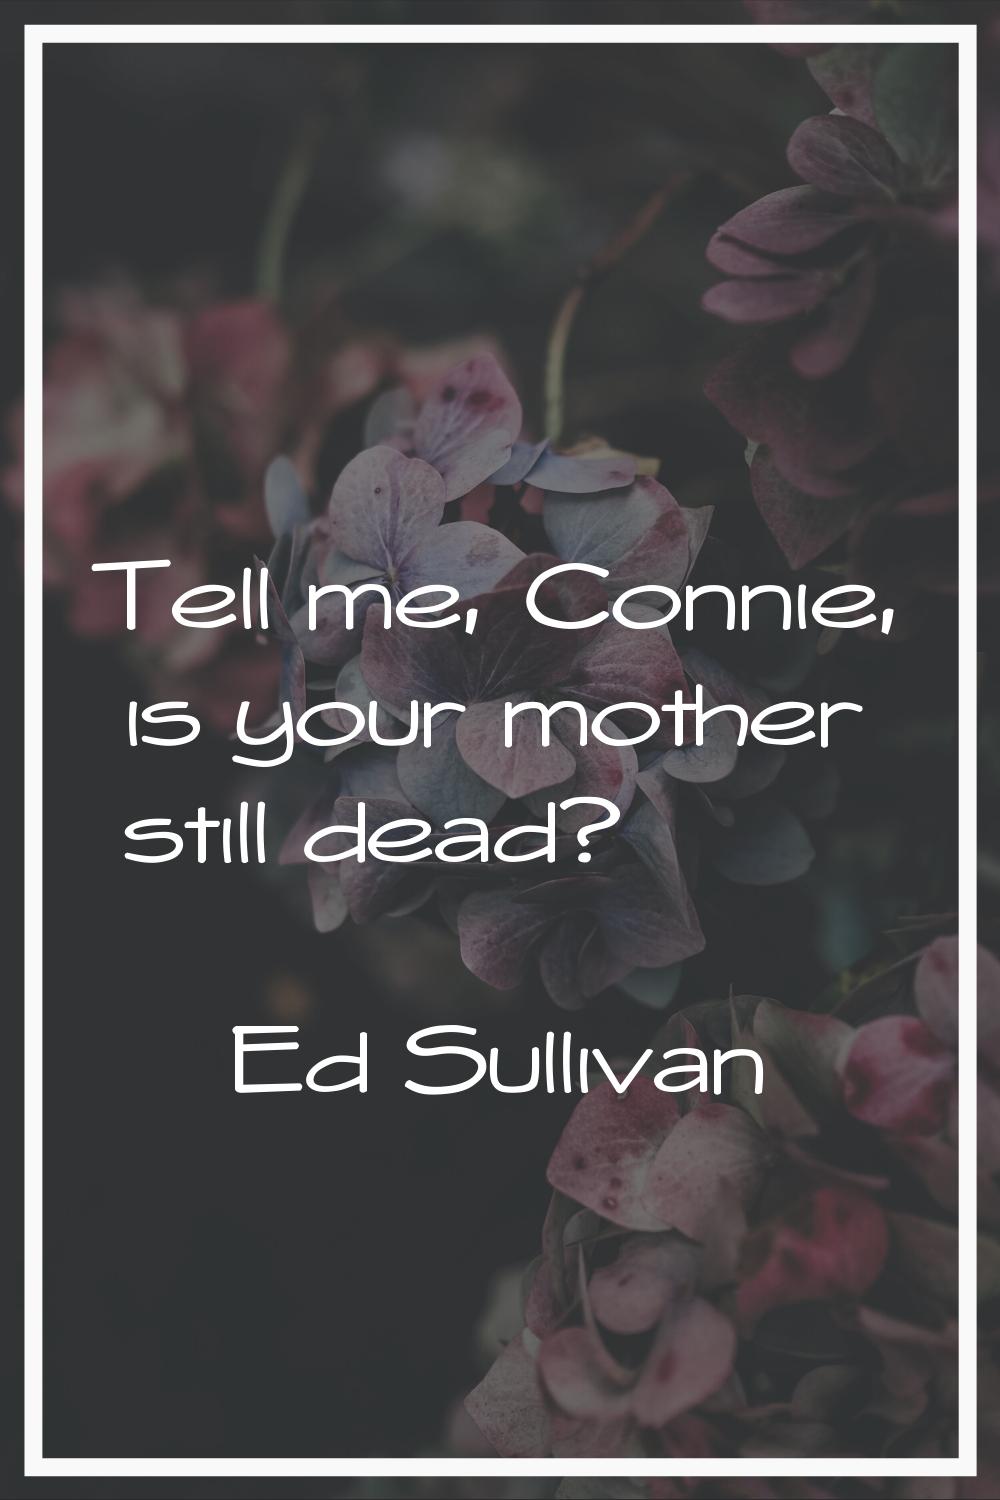 Tell me, Connie, is your mother still dead?